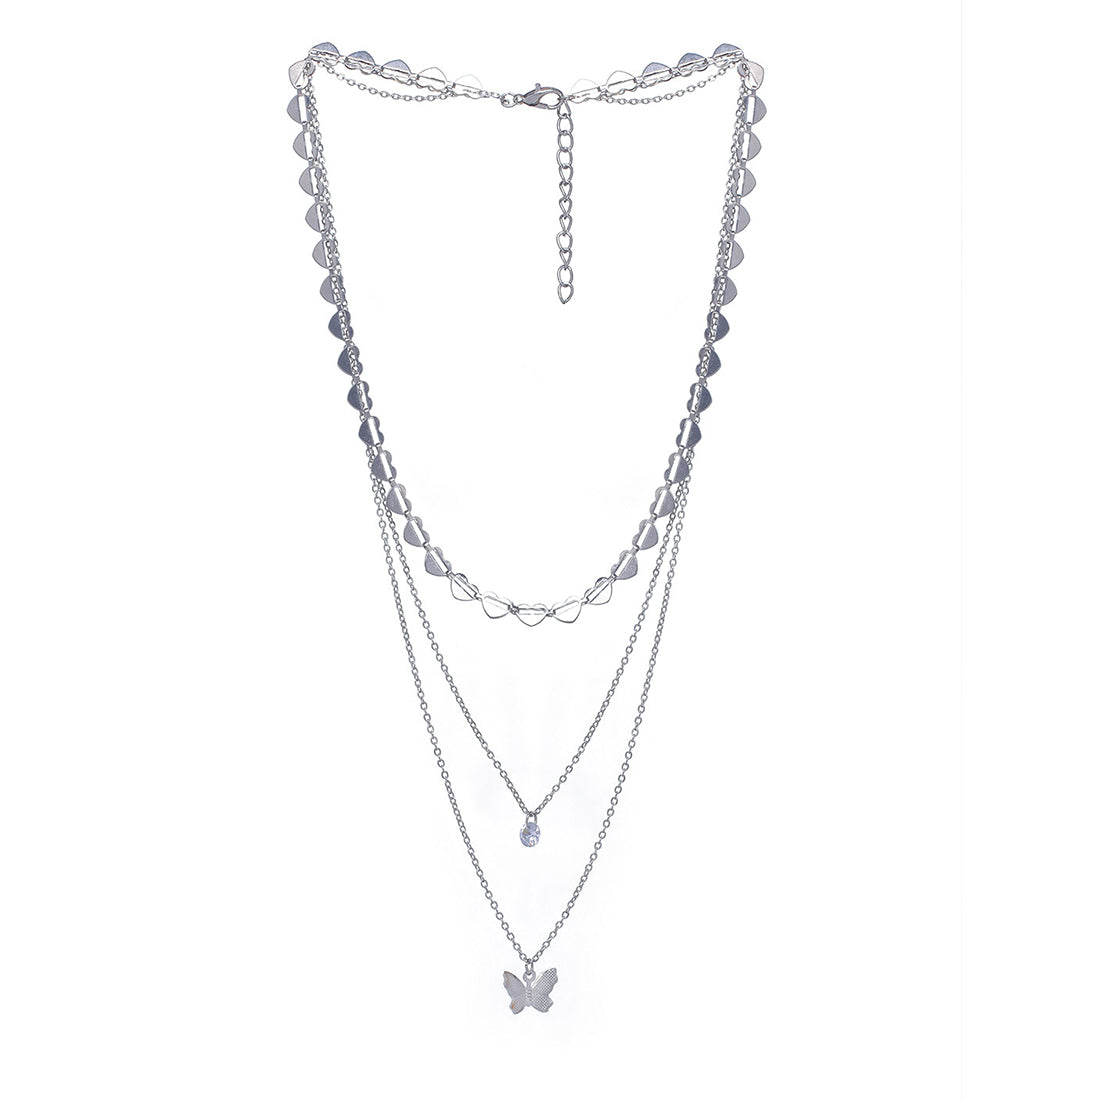 Trendy Three Layered Silver Necklace with Butterfly Pendant , diamonti stone and Chain of Hearts